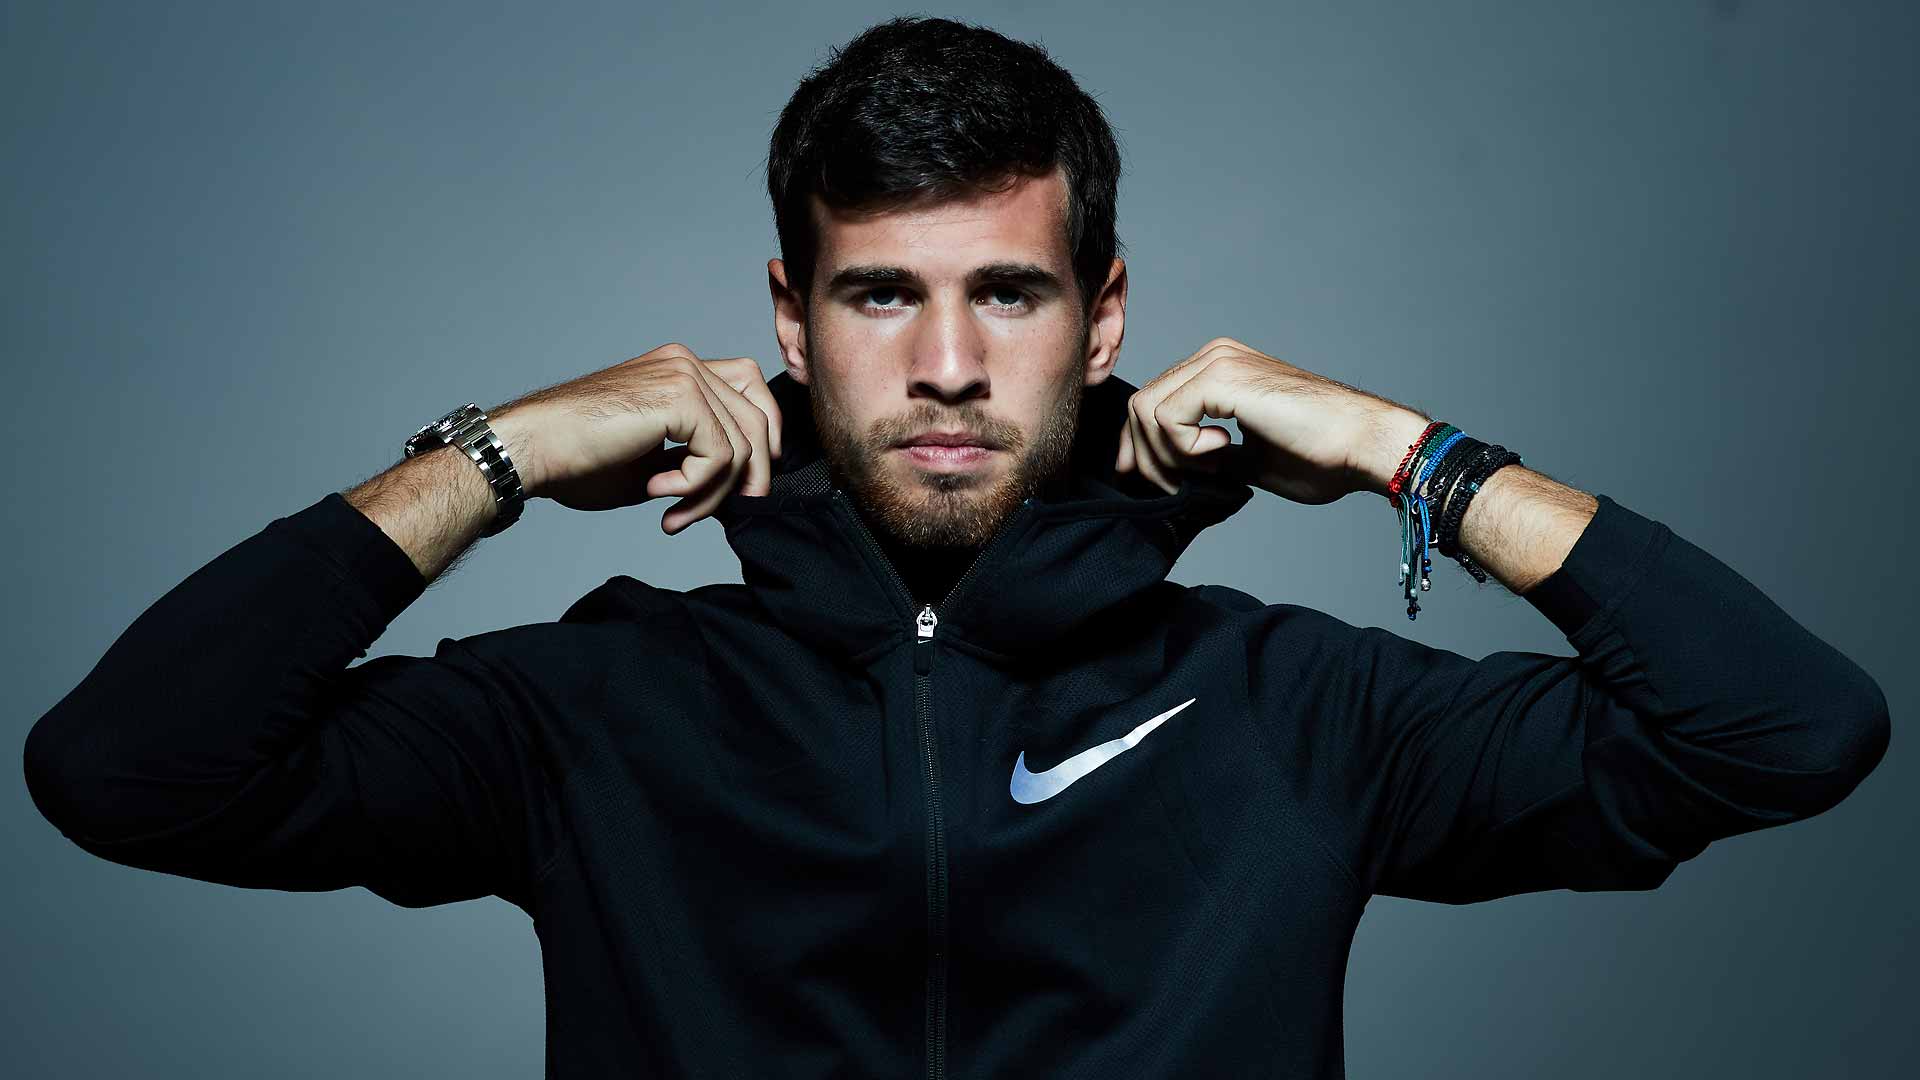 Karen Khachanov reached the semi-finals at the Canadian ATP Masters 1000 tournament last year in Toronto.